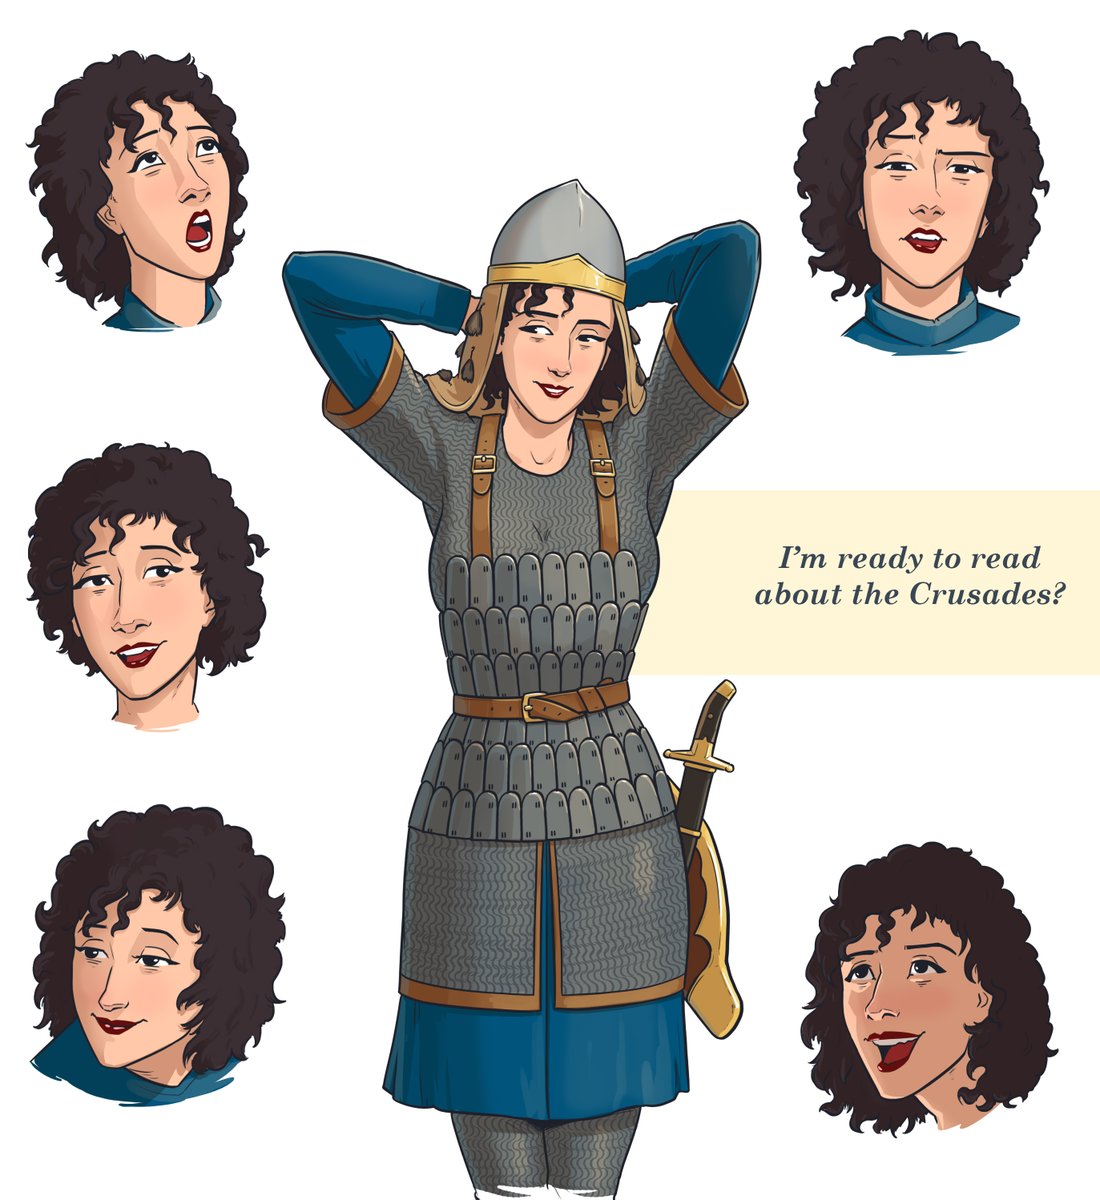 Kiara, the historically accurate cosplayer (some call her 'reenactor')